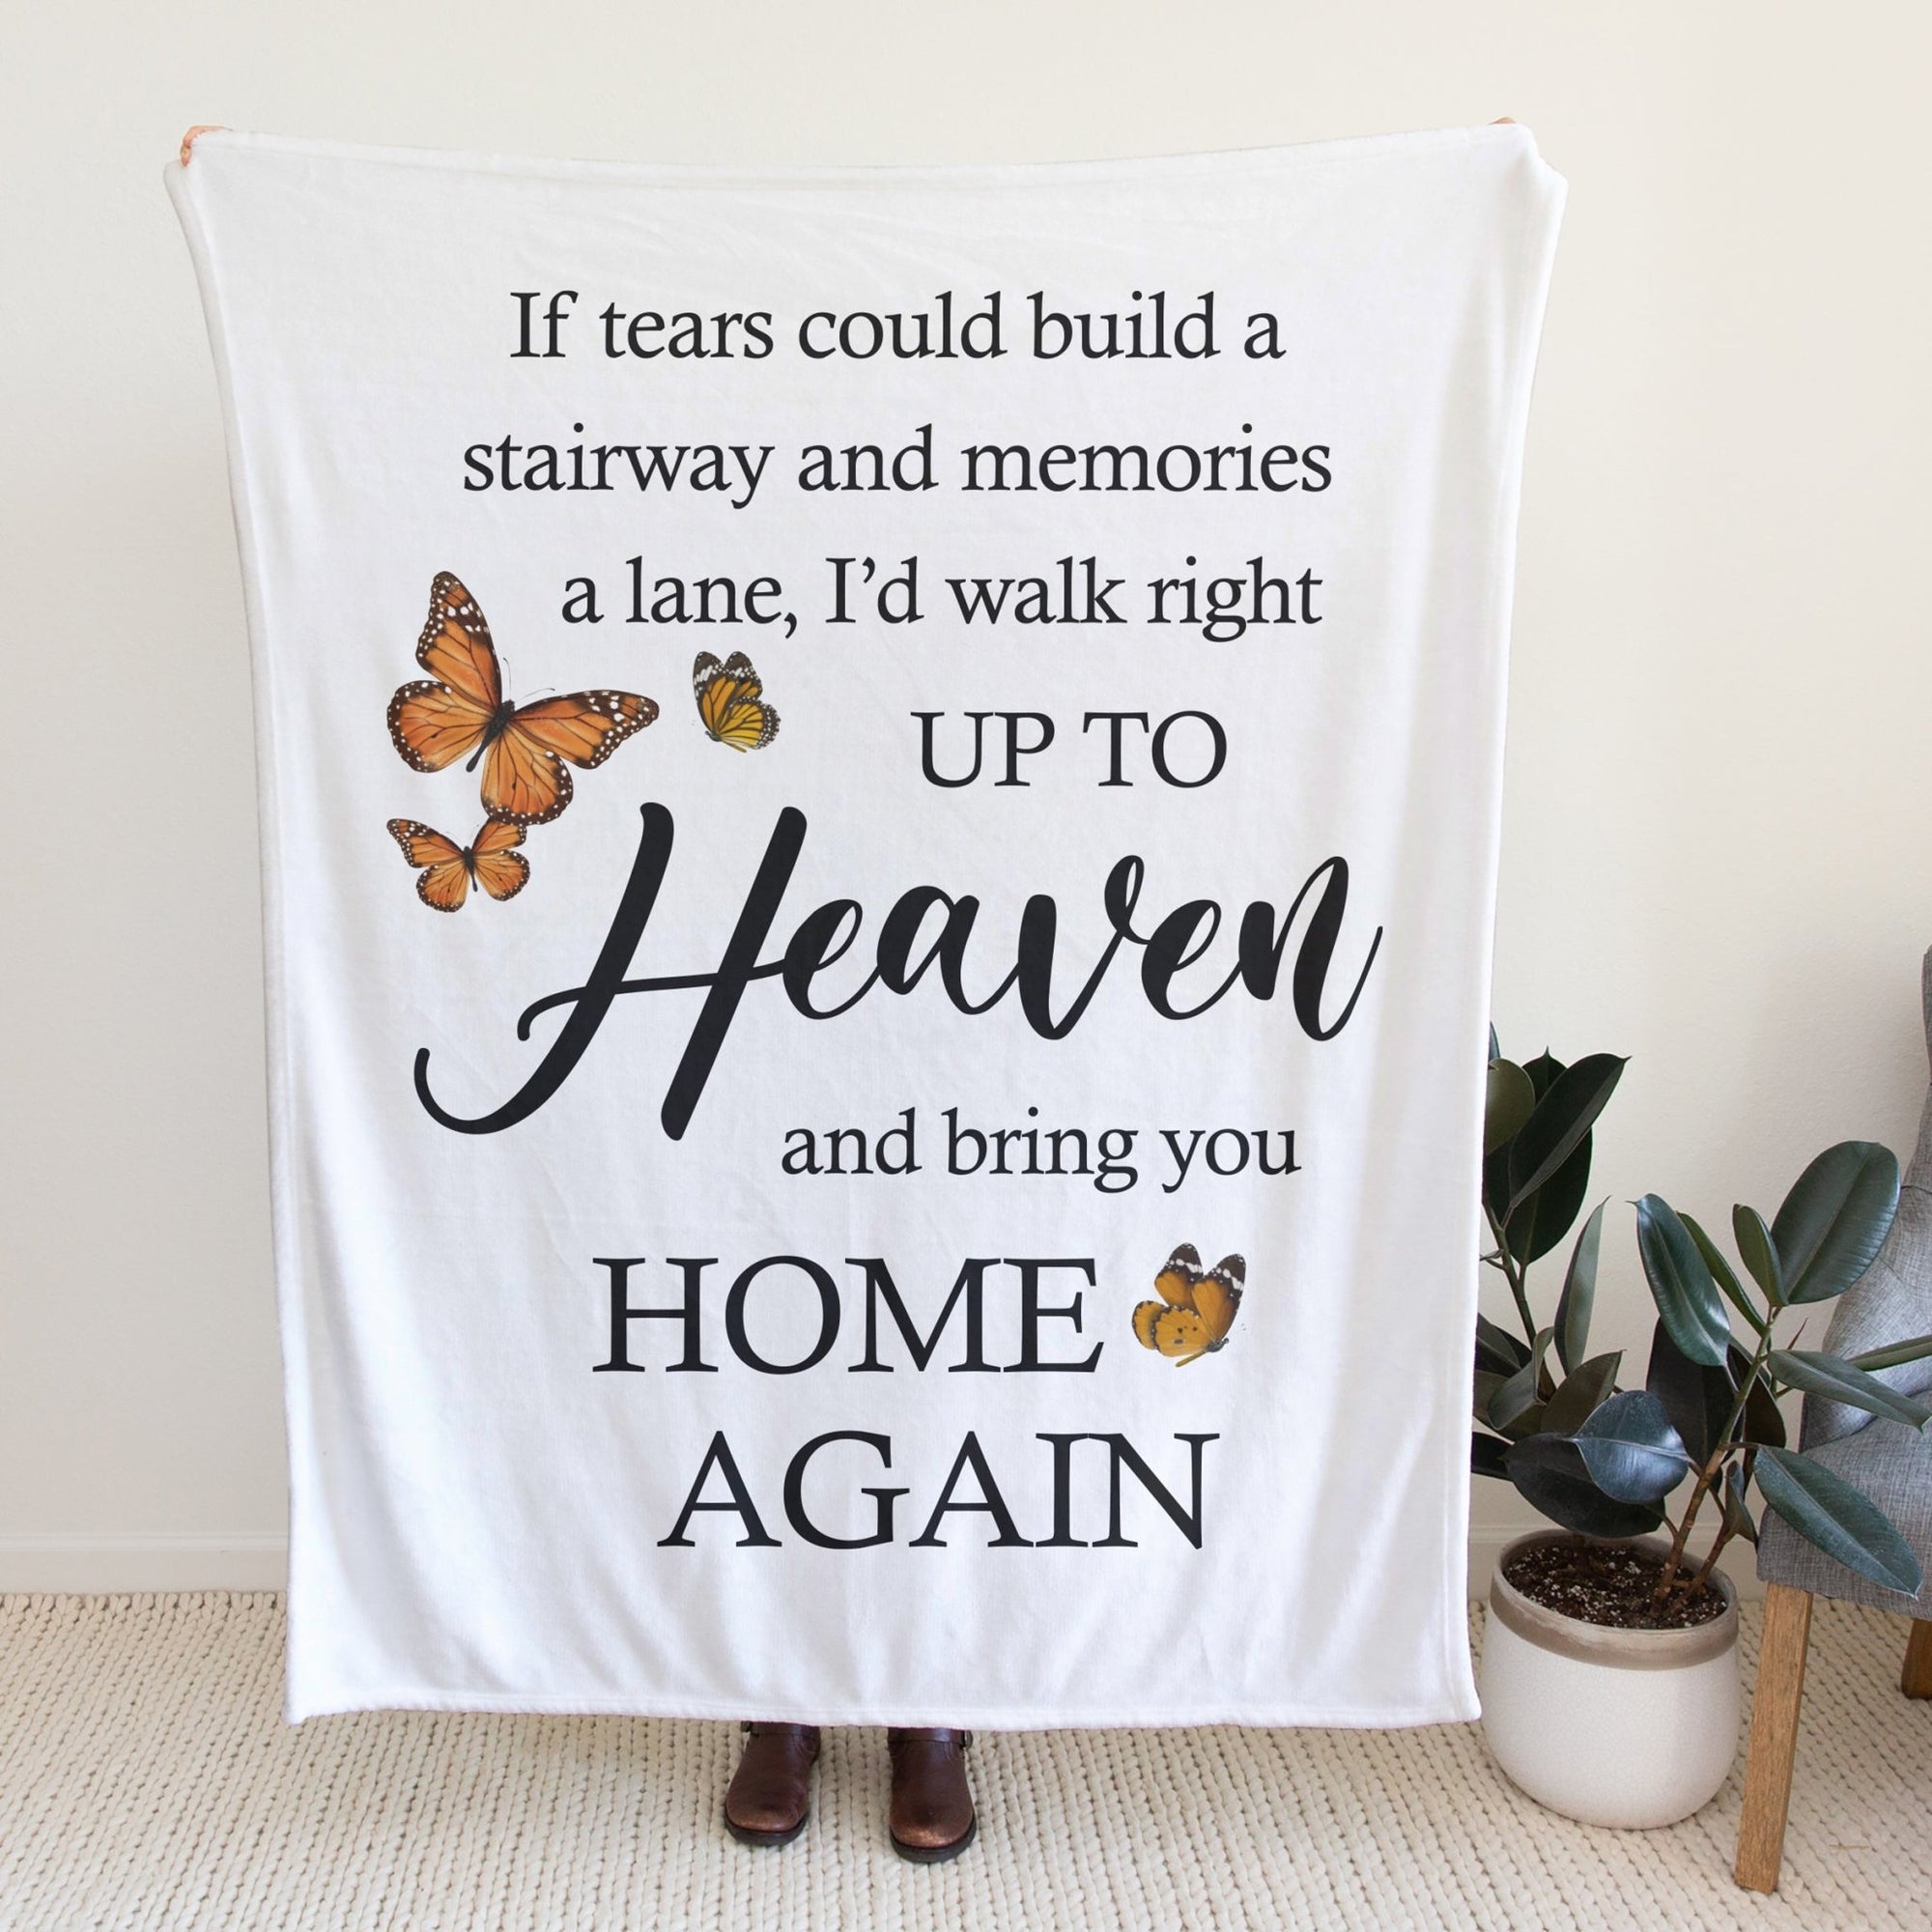 If Tears Could Build a Stairway to Heaven (Butterflies) - Memorial White Decorative Throw Blanket For Home Décor Ideas - LifeSong Milestones